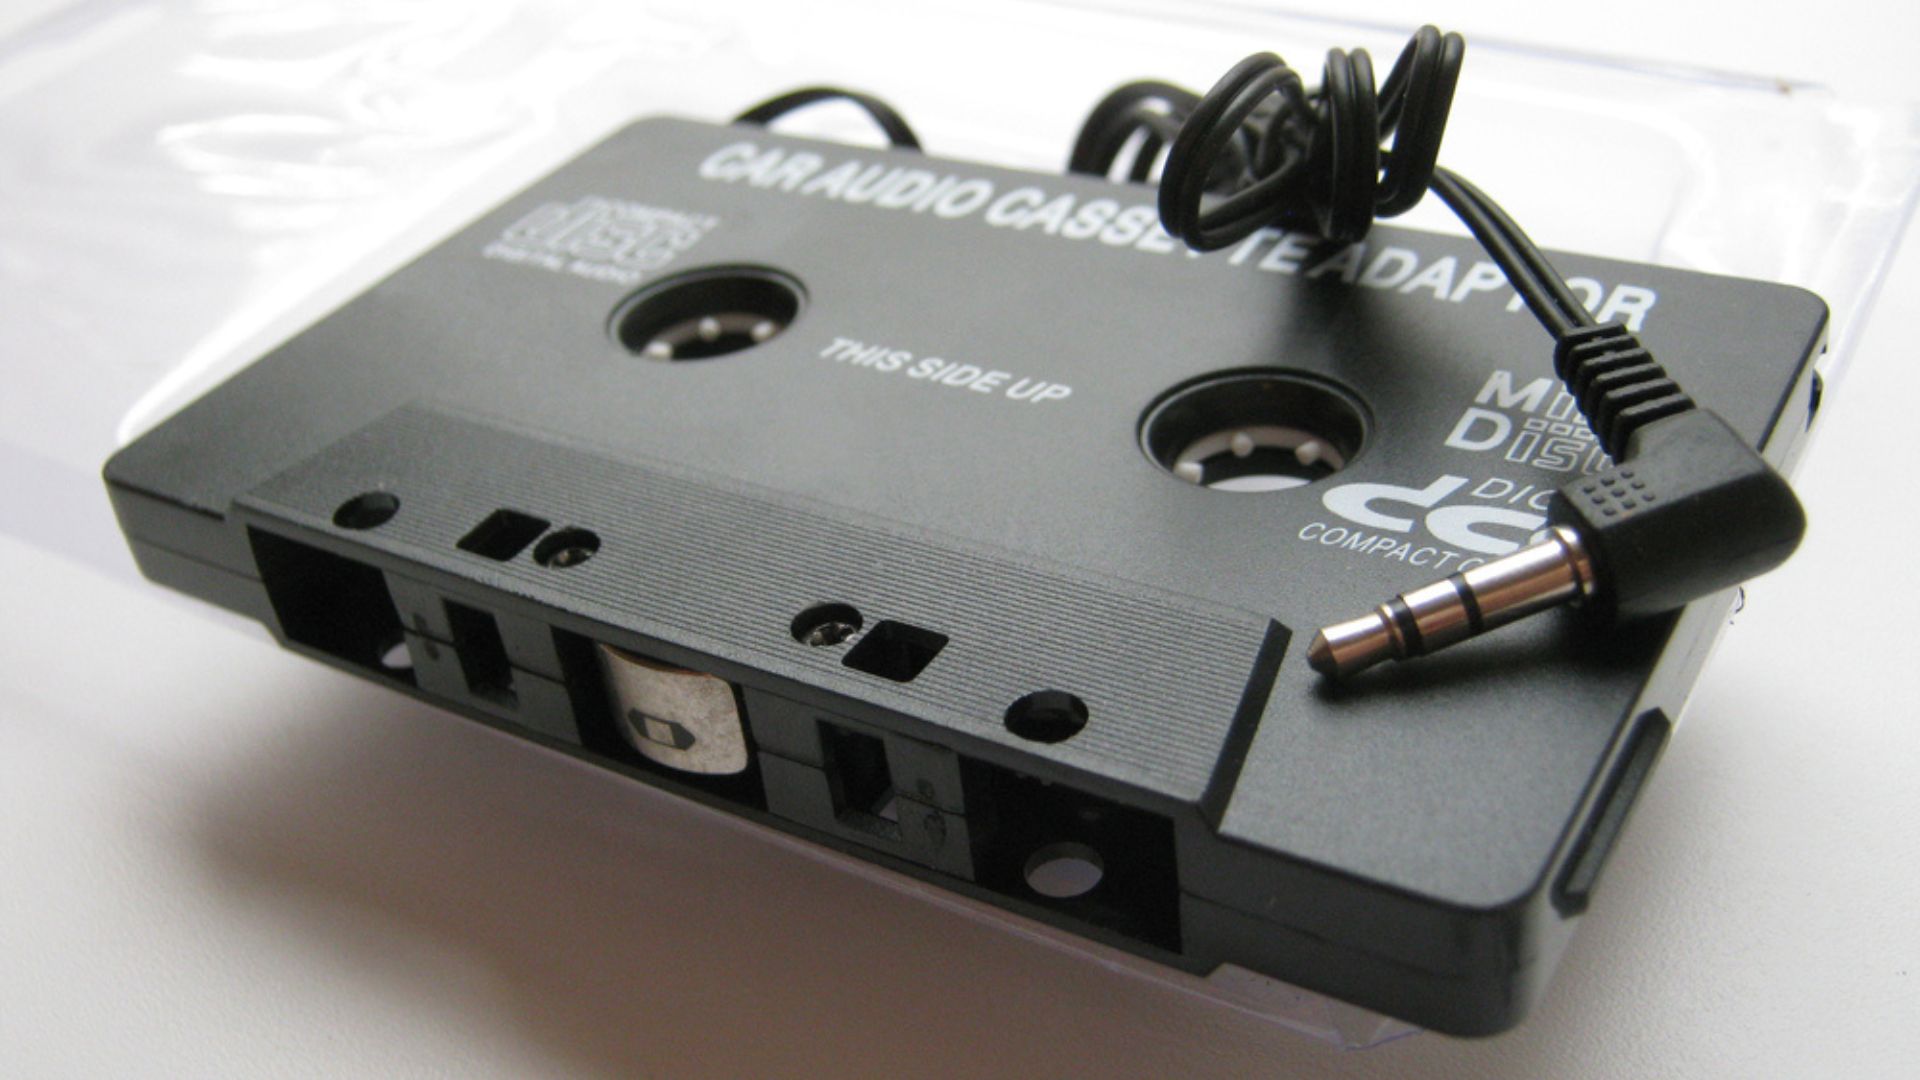 A Car Audio Systems Stereo Cassette Tape Adapter for Mobile